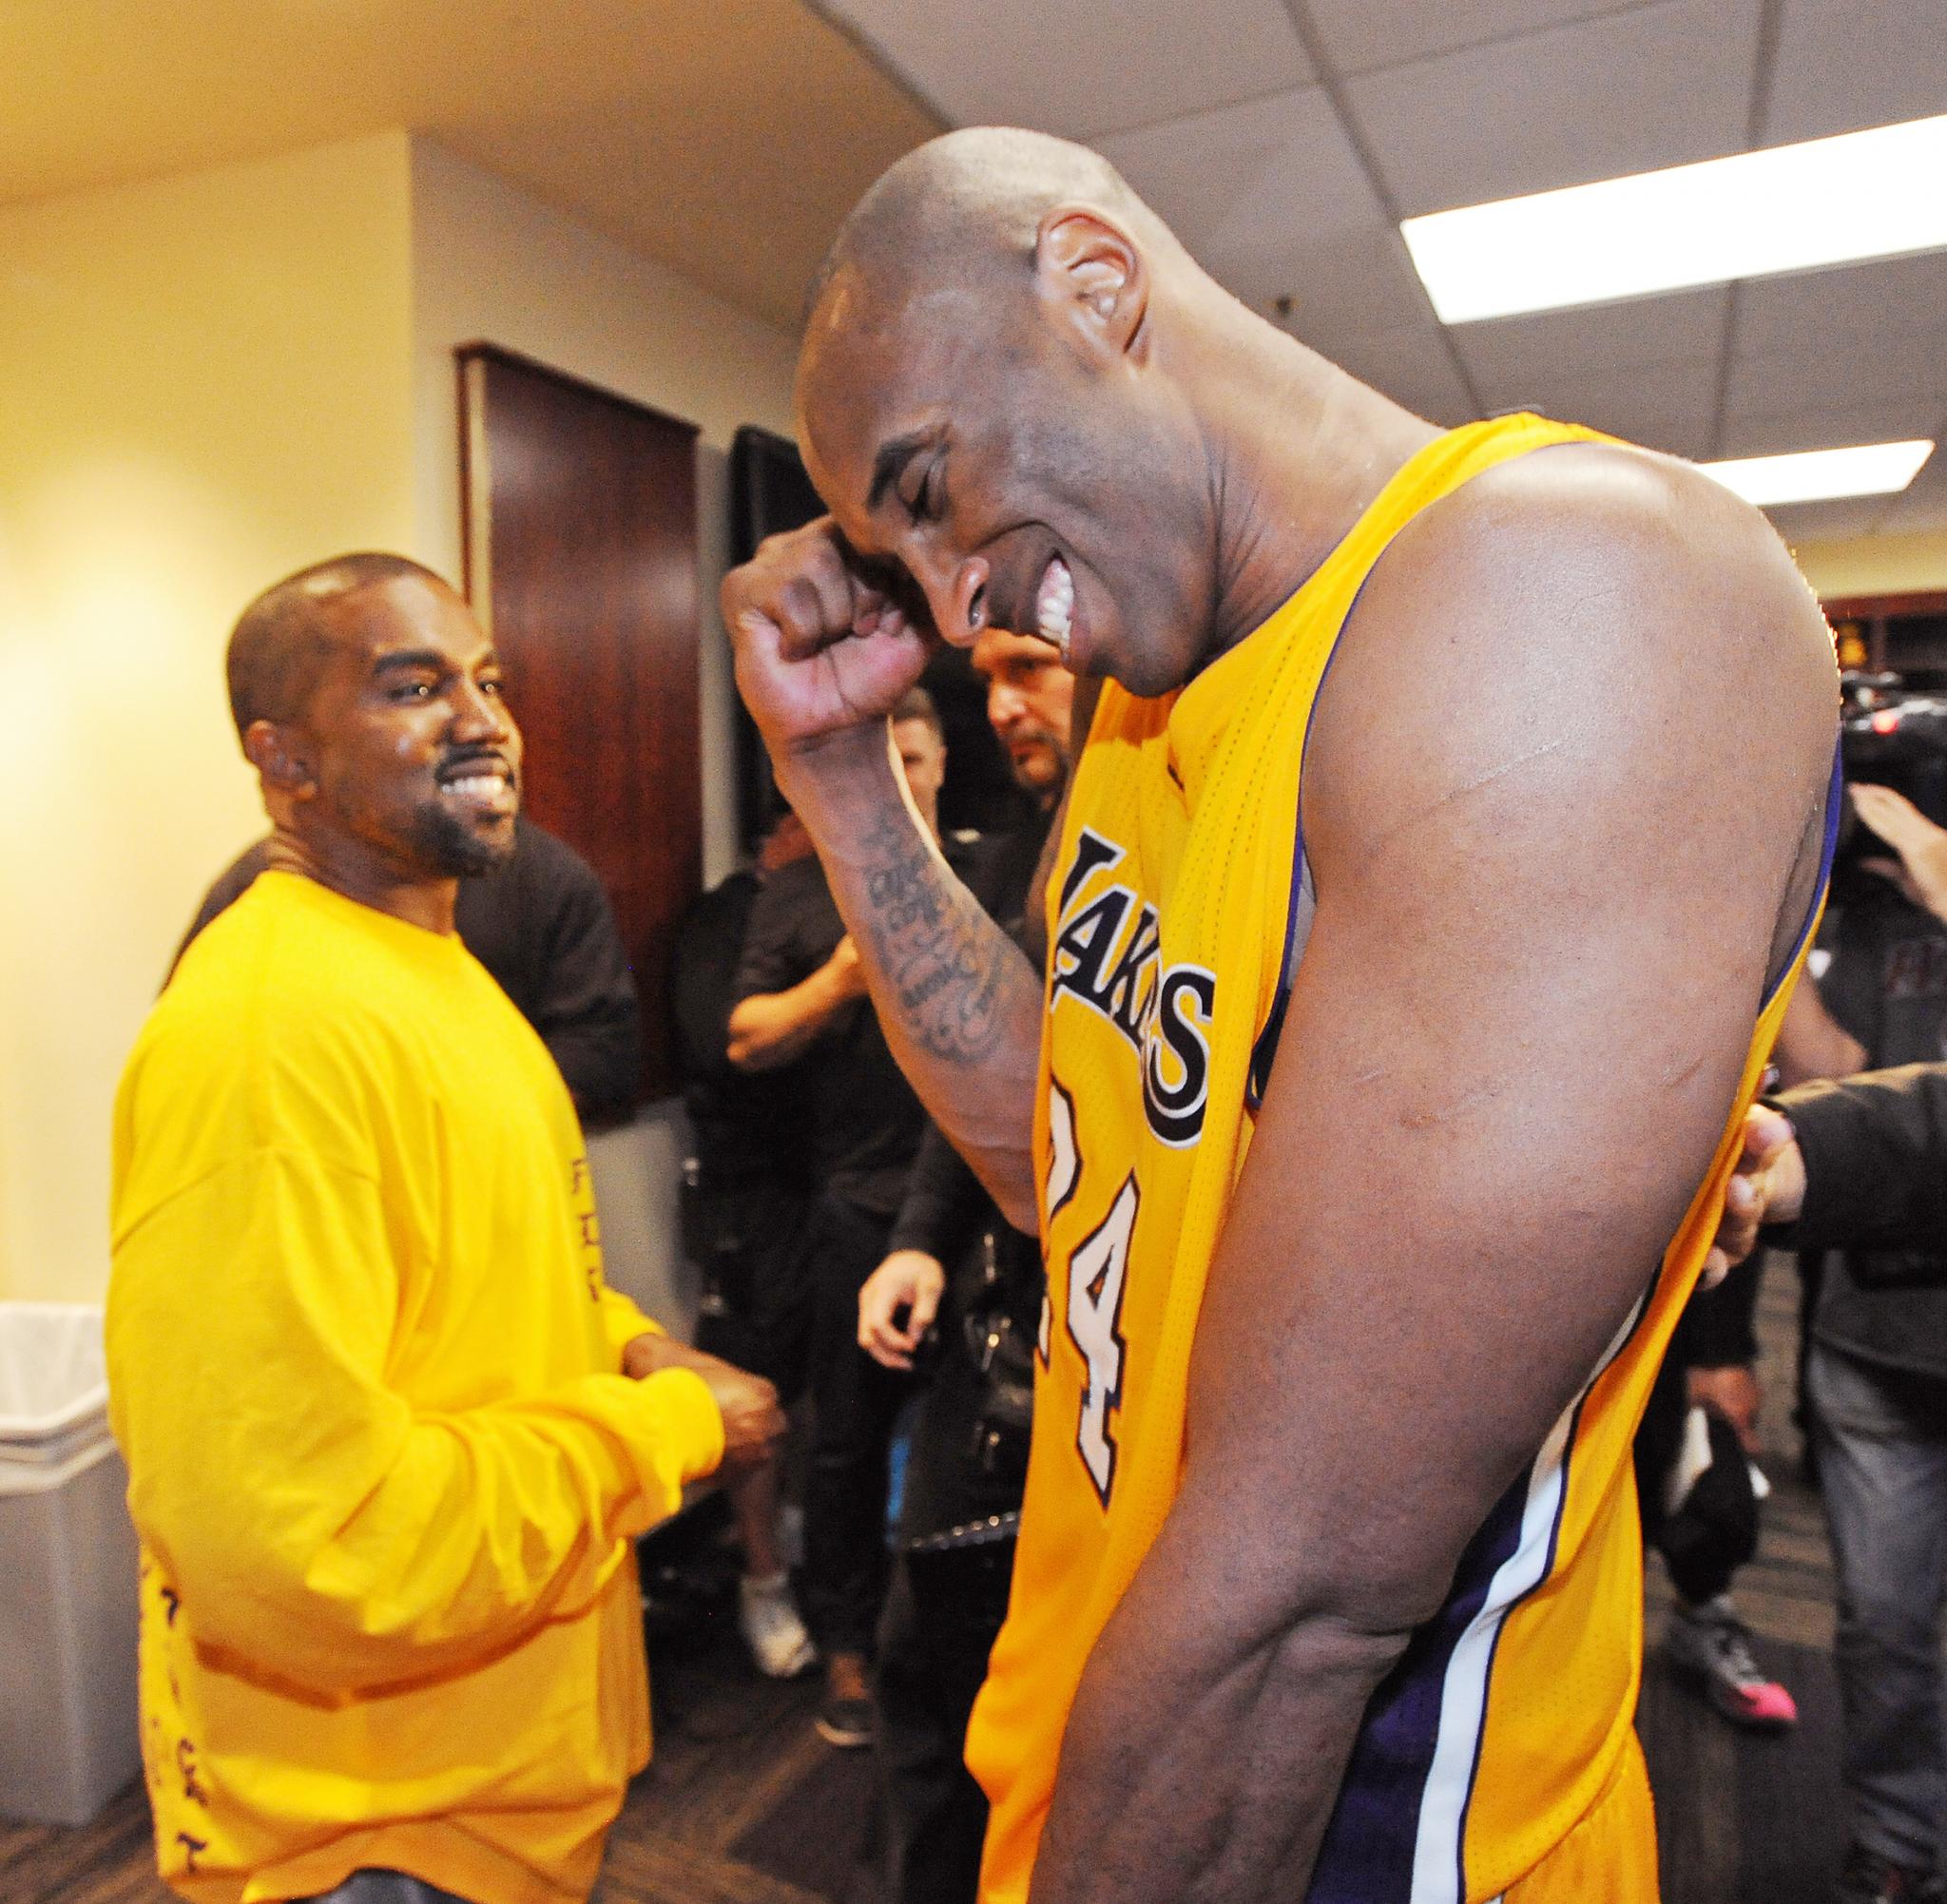 Jay Z, Kanye West, Kendrick Lamar, and More, Gave Kobe Bryant a Send Off to Remember
